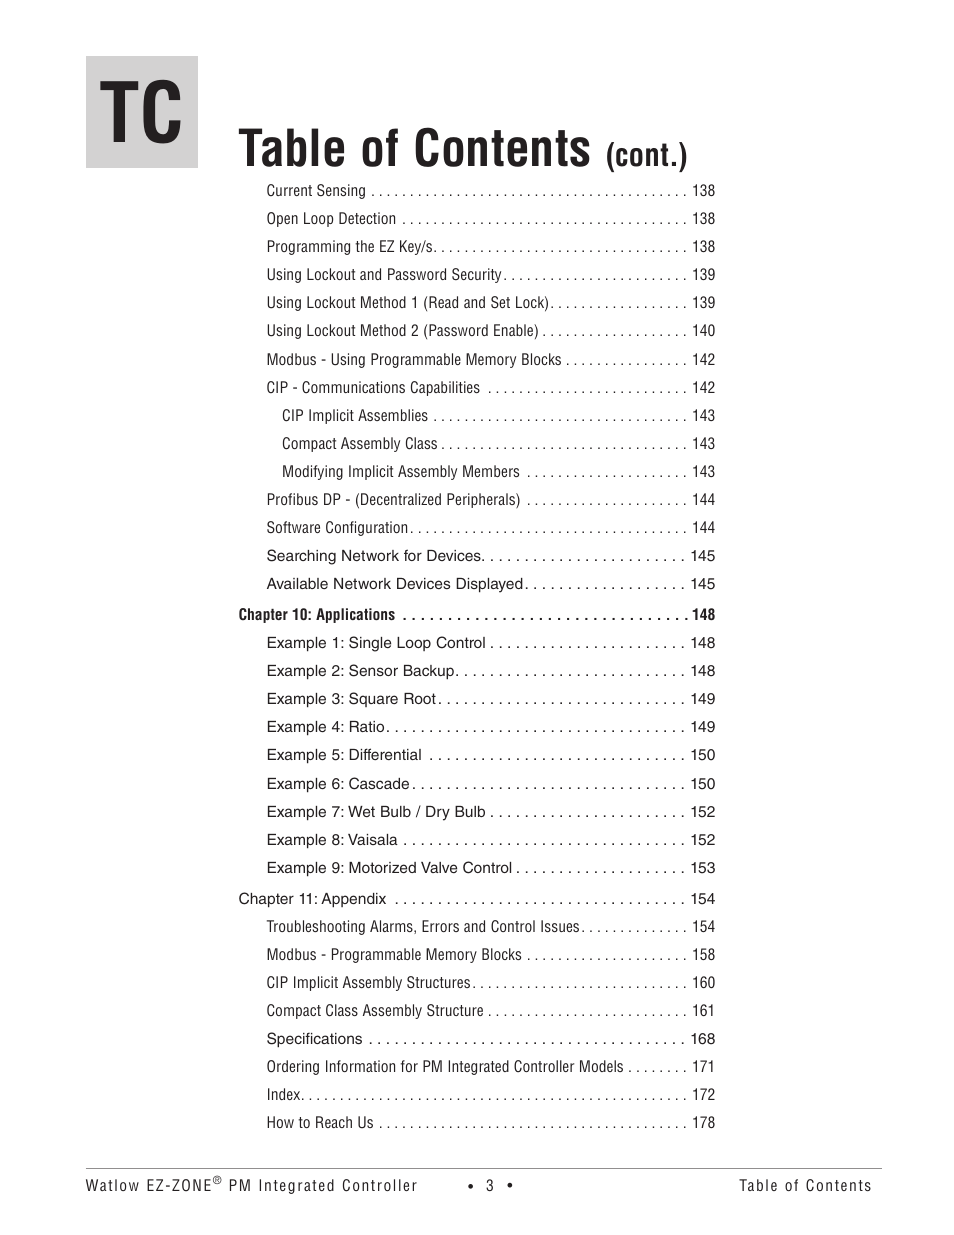 Watlow EZ-ZONE PM Integrated Controller User Manual | Page 6 / 181